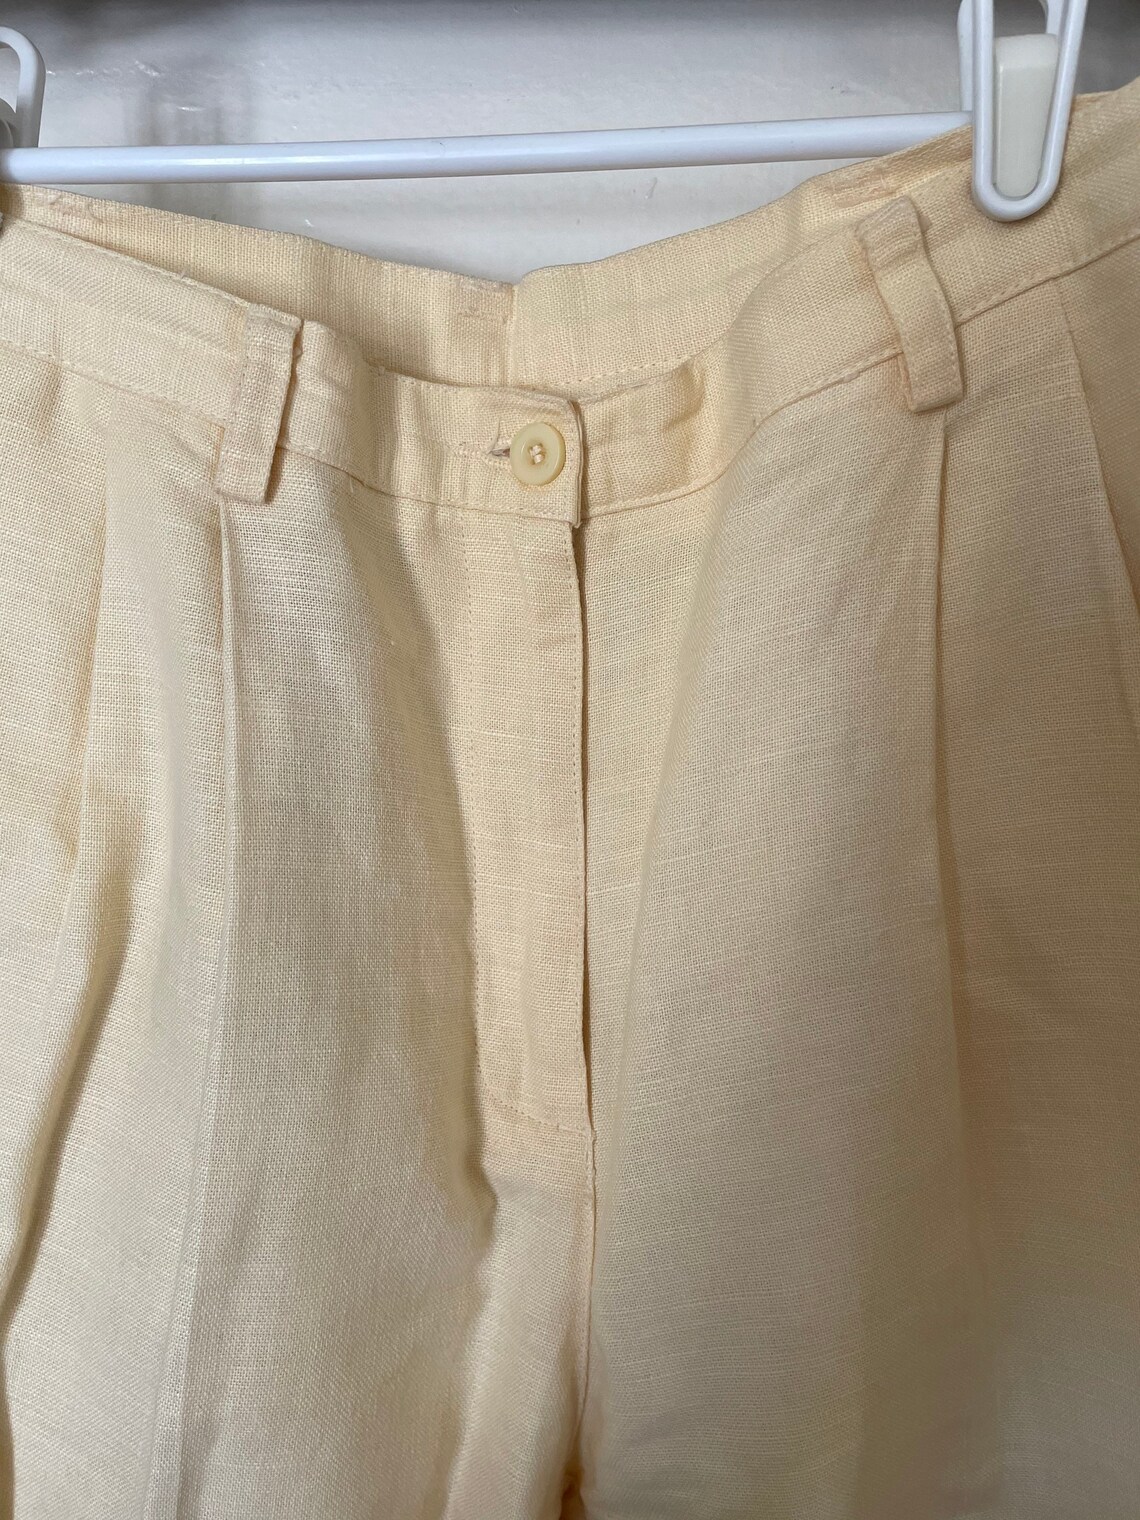 High-Waisted Butter Yellow Linen Pant | Etsy